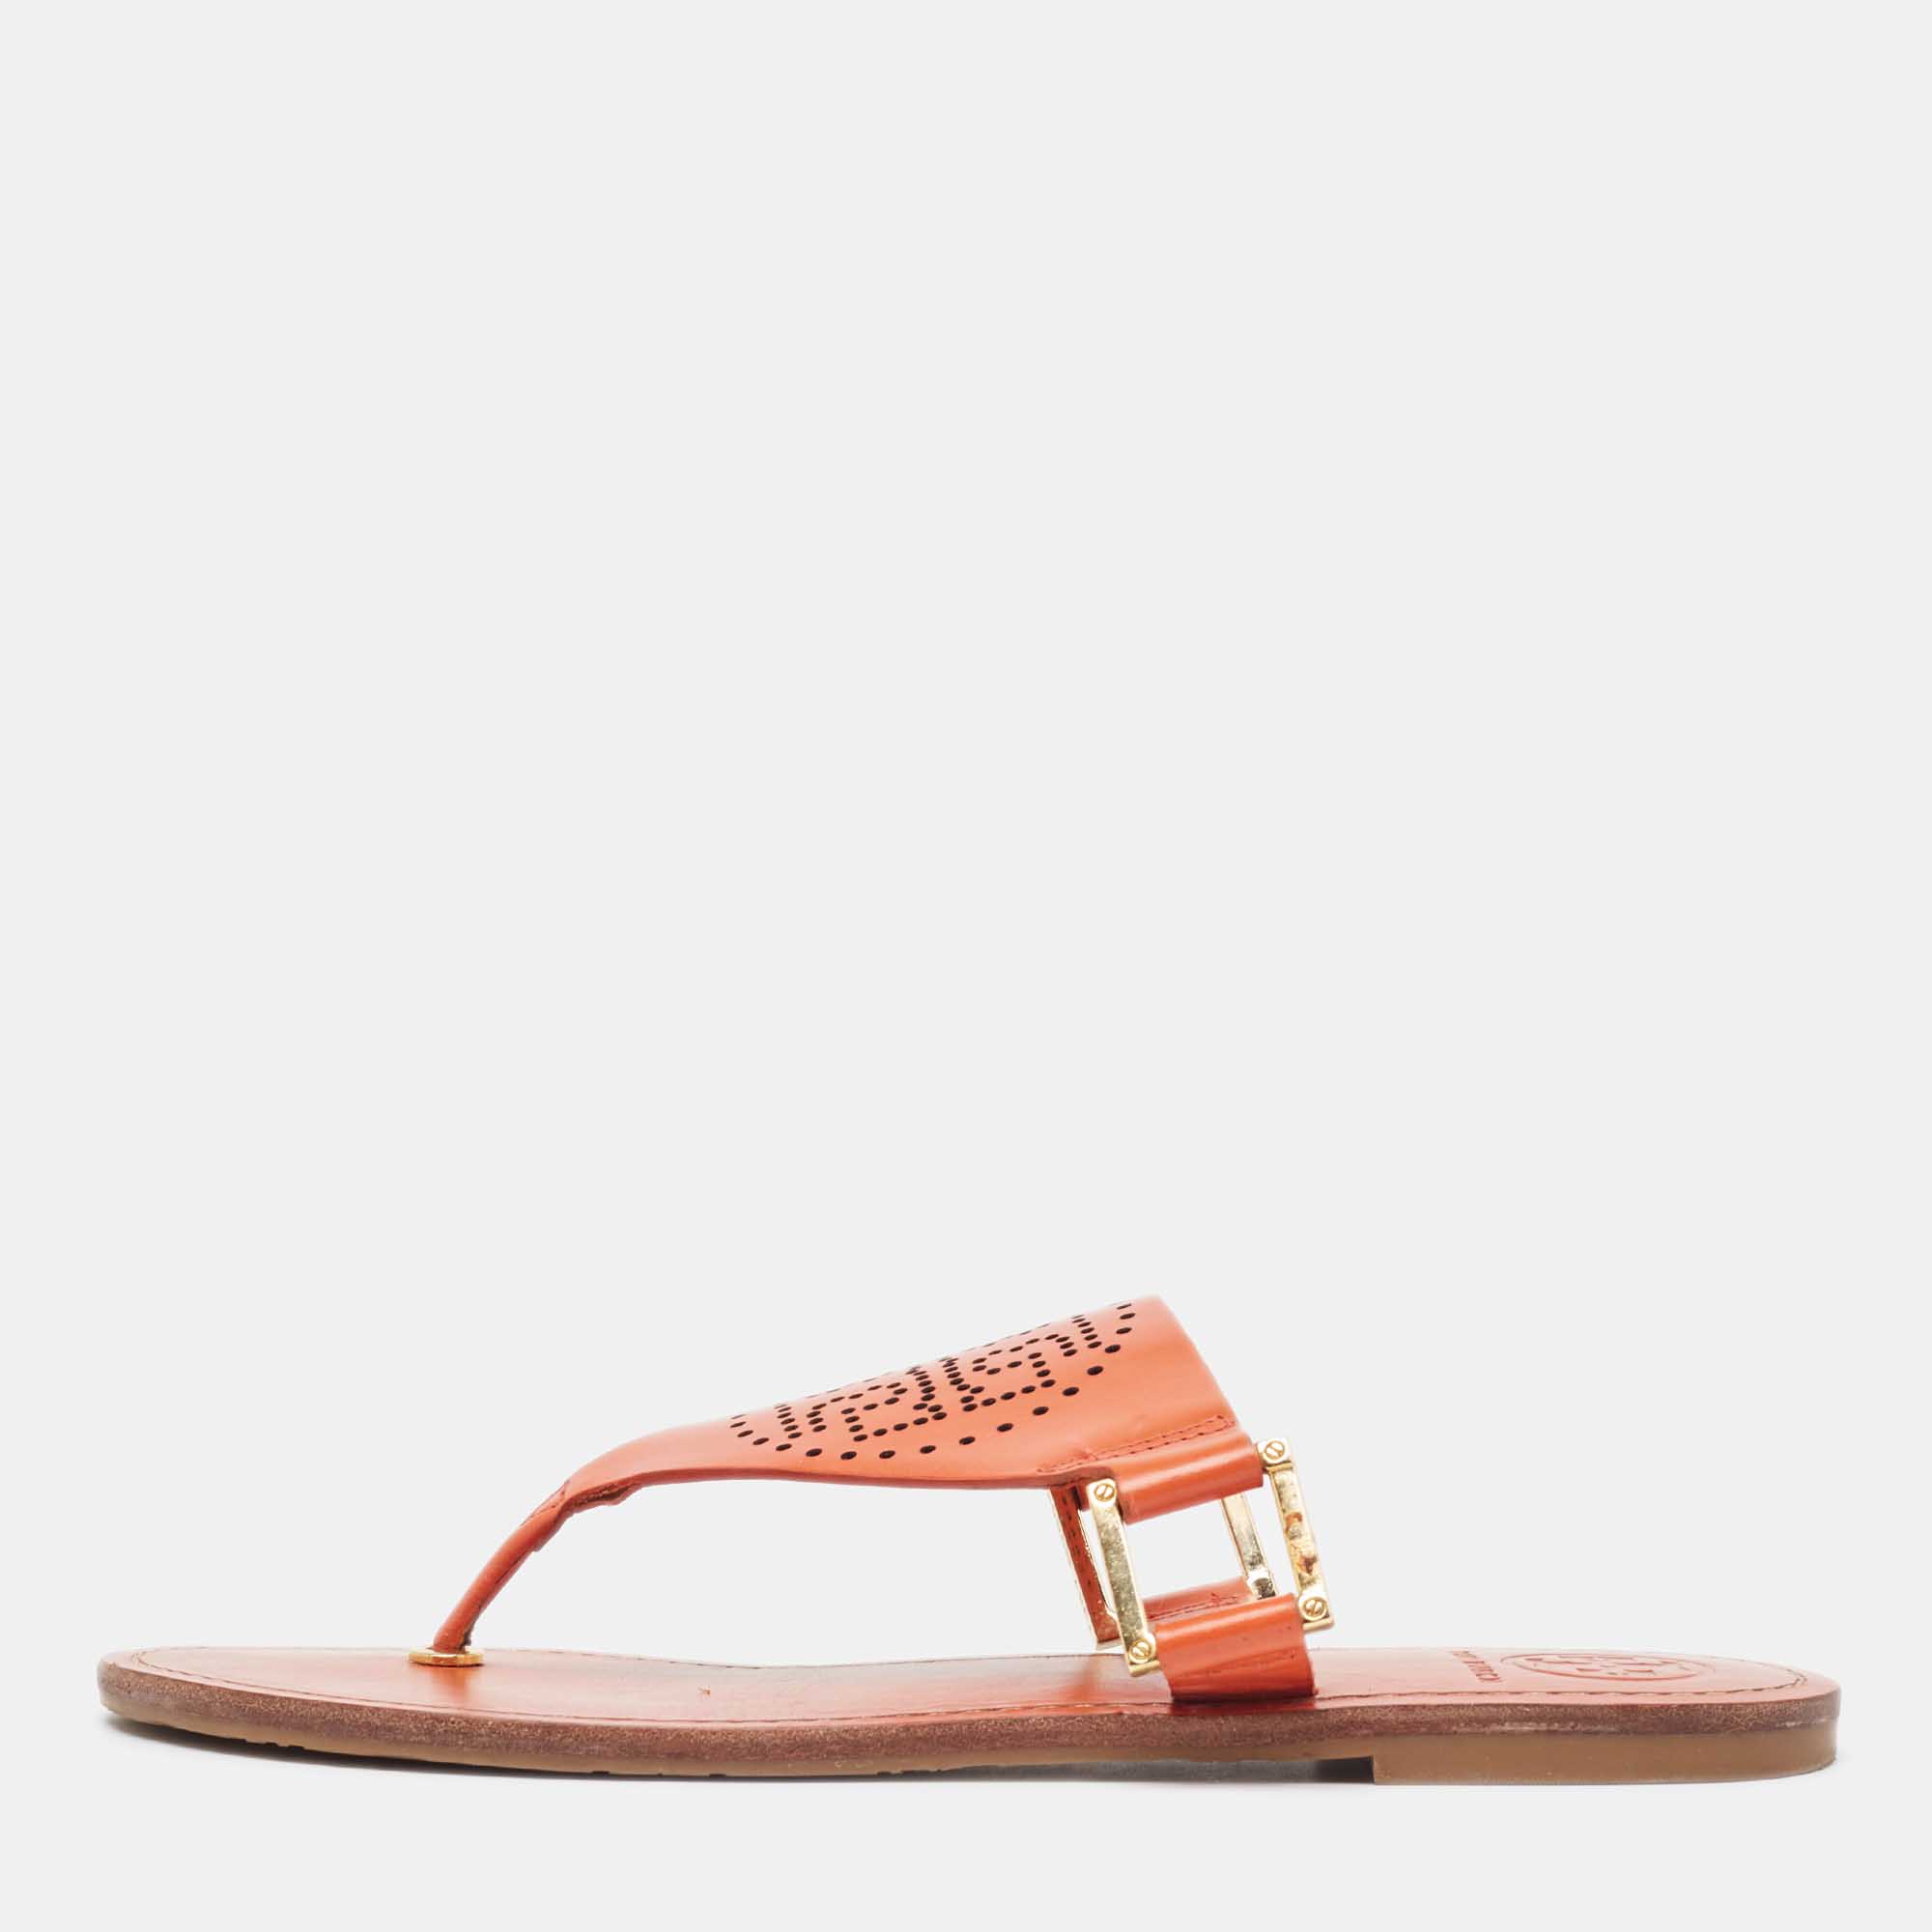 

Tory Burch Orange Perforated Leather Thong Sandals Size